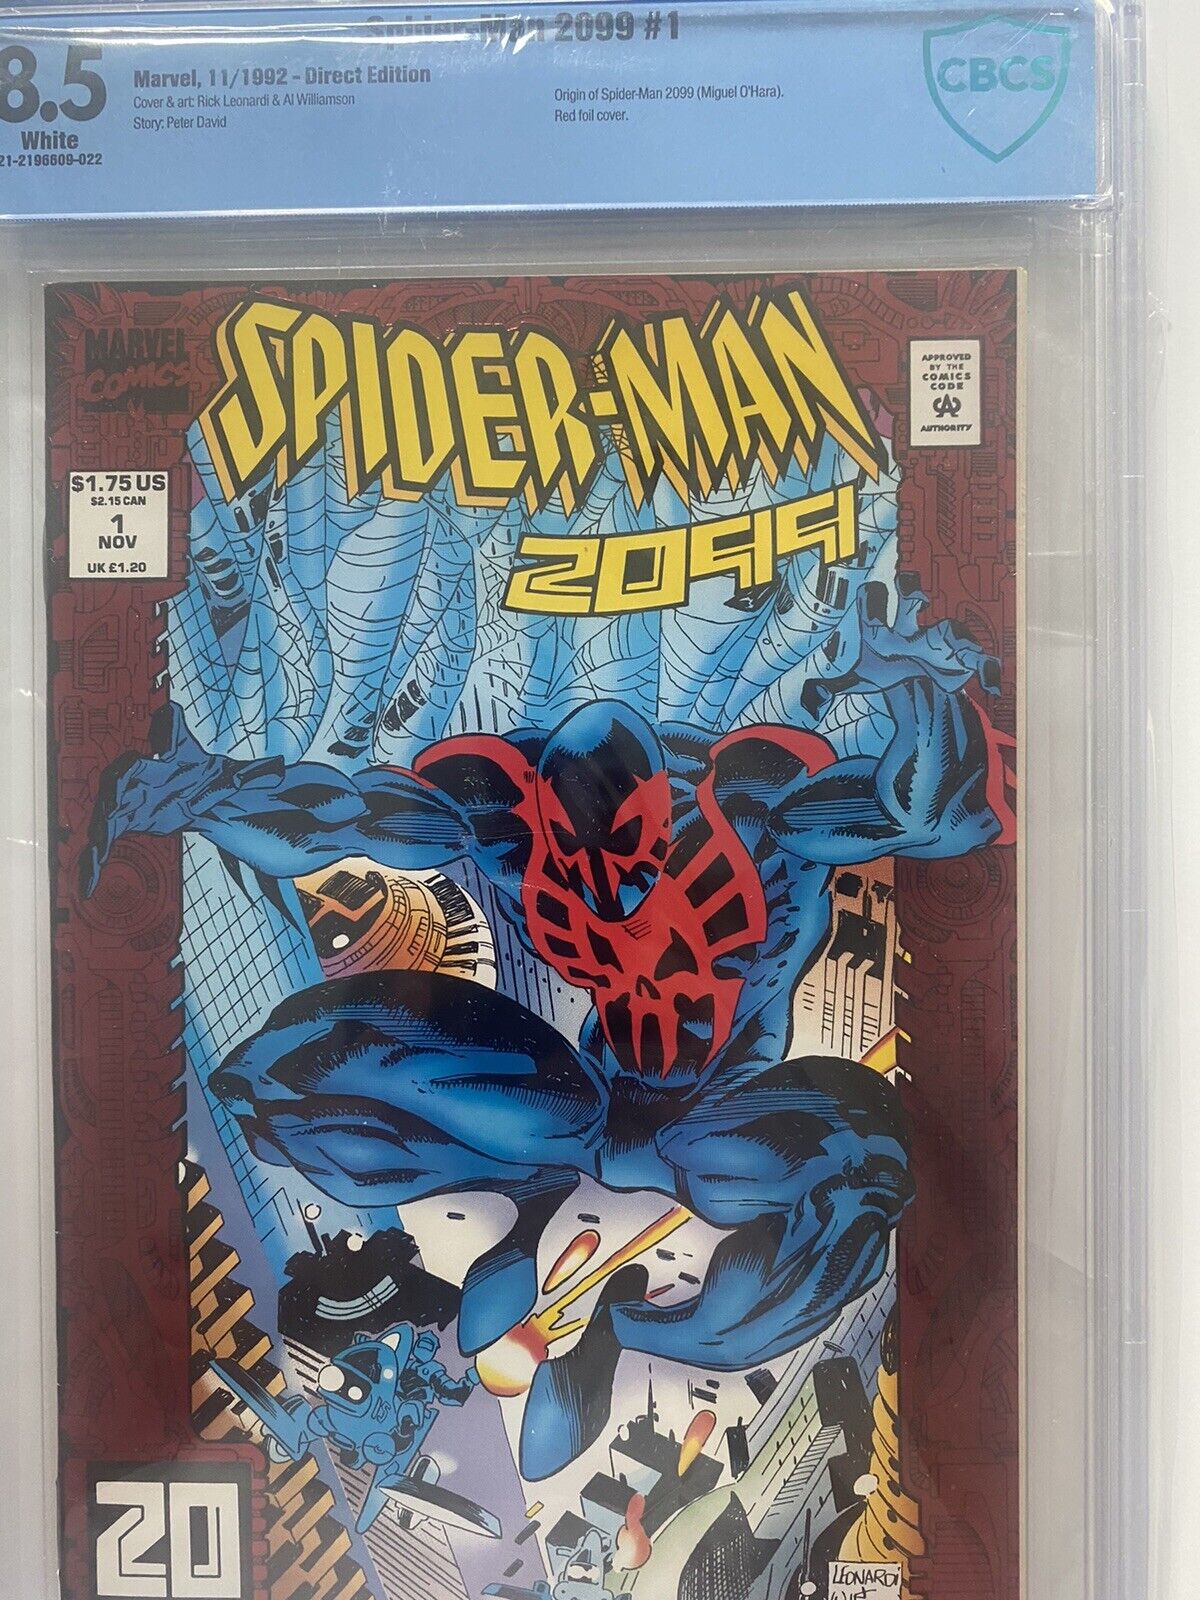 Spider-Man 2099 #1 1992, 1st Full App, Red FOIL Cover, CBcs 8.5 White Pages